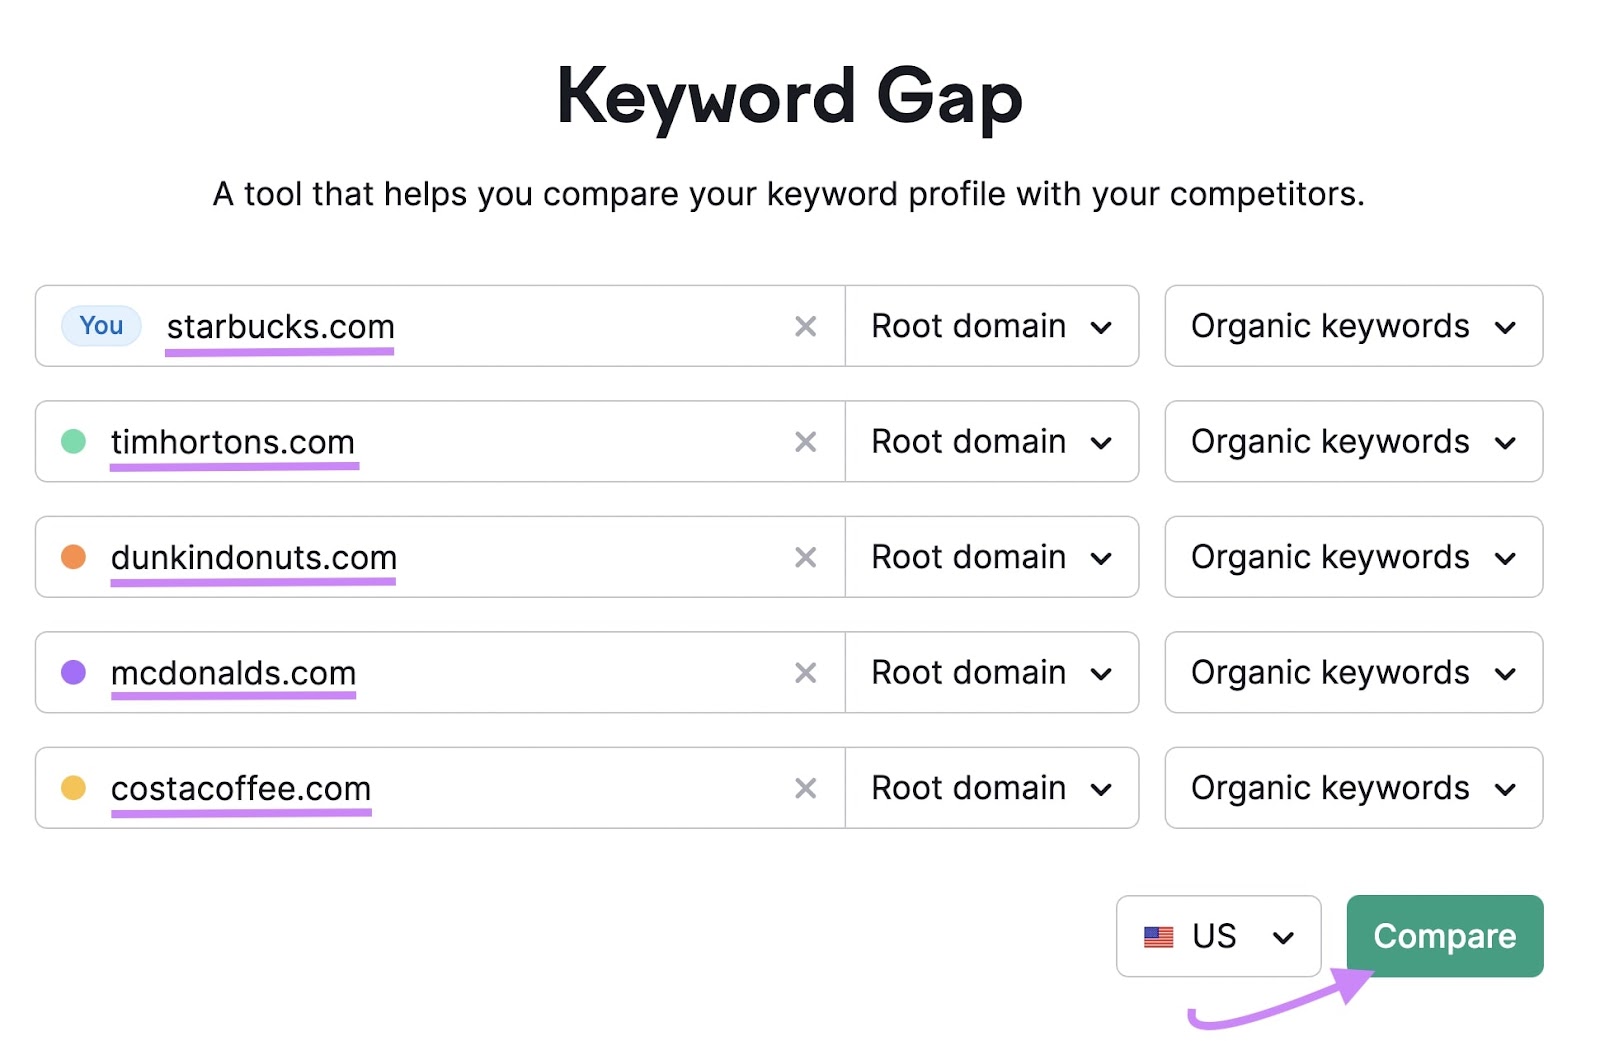 "starbucks.com" and four competitor domains entered into the Keyword Gap tool search